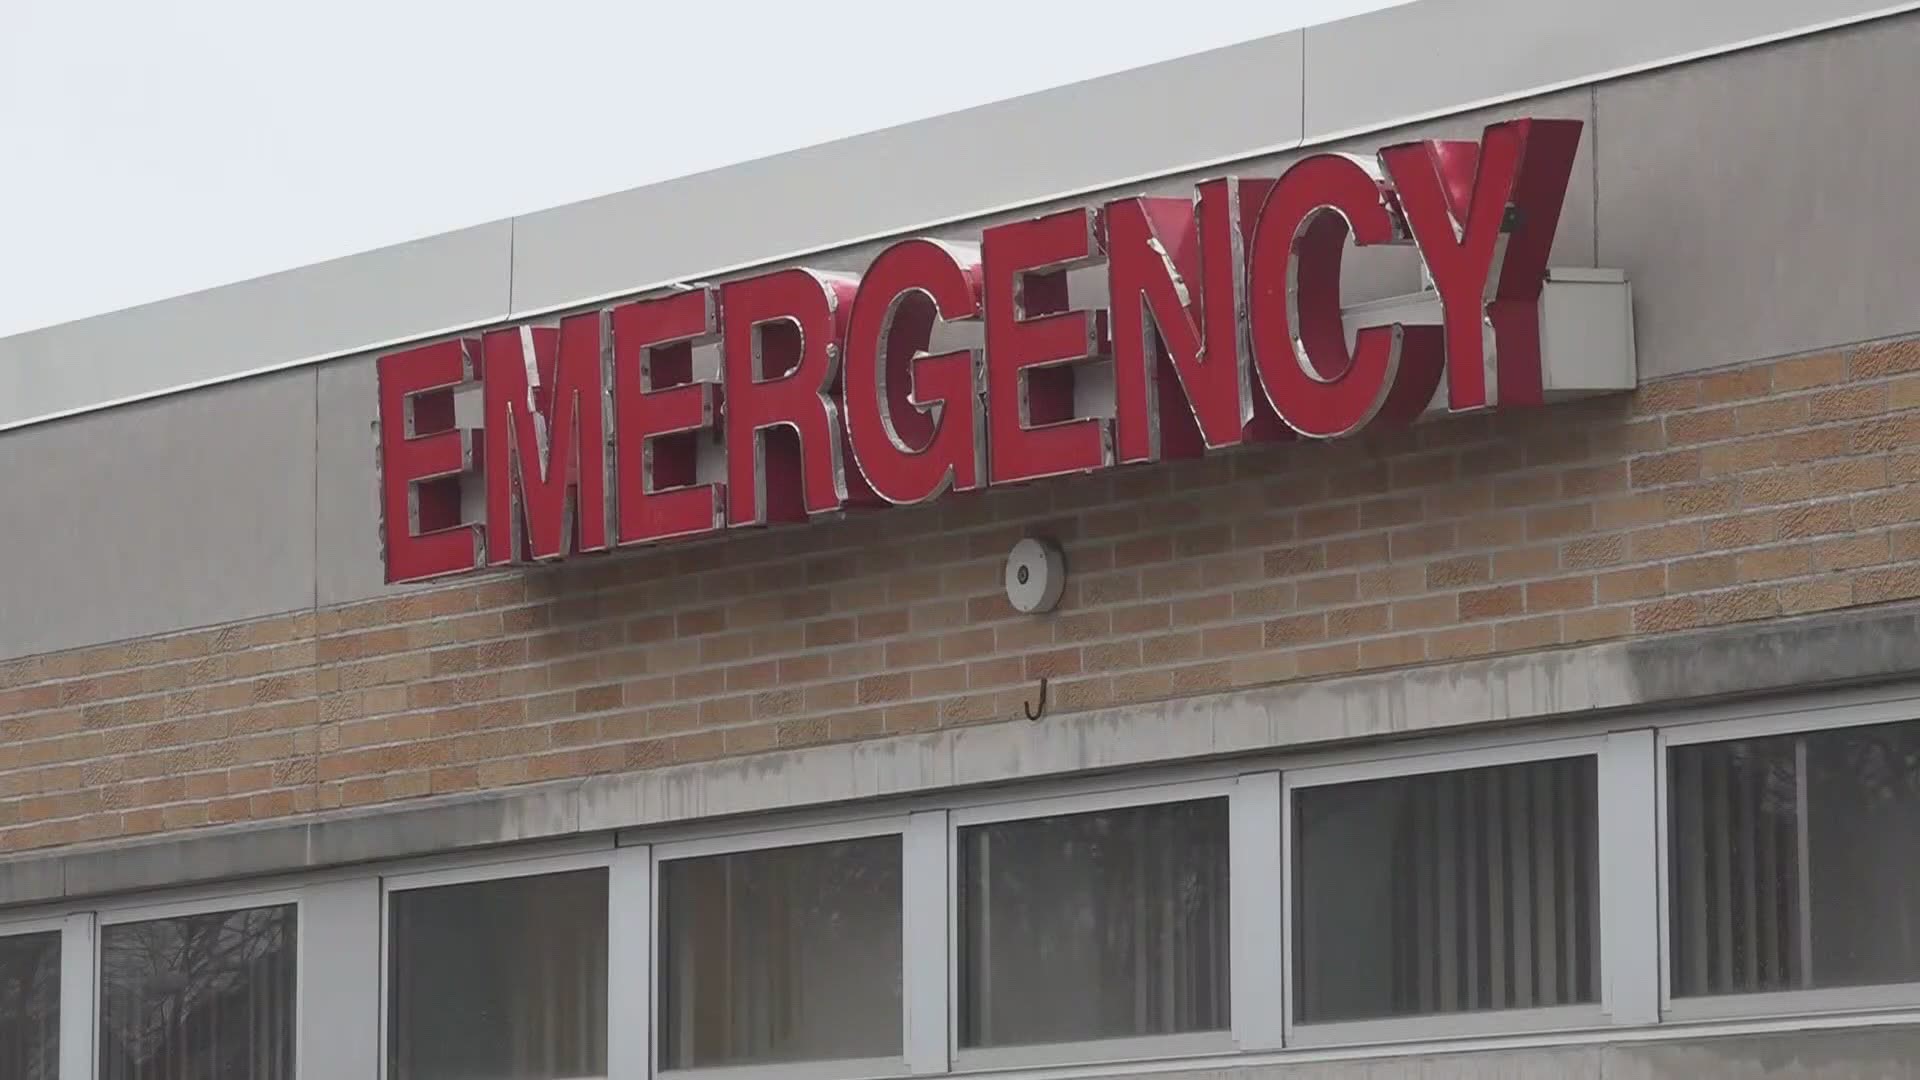 The report, coming from the U.S. CDC, says that the numbers of young people going to emergency departments due to suicide attempts is rising.